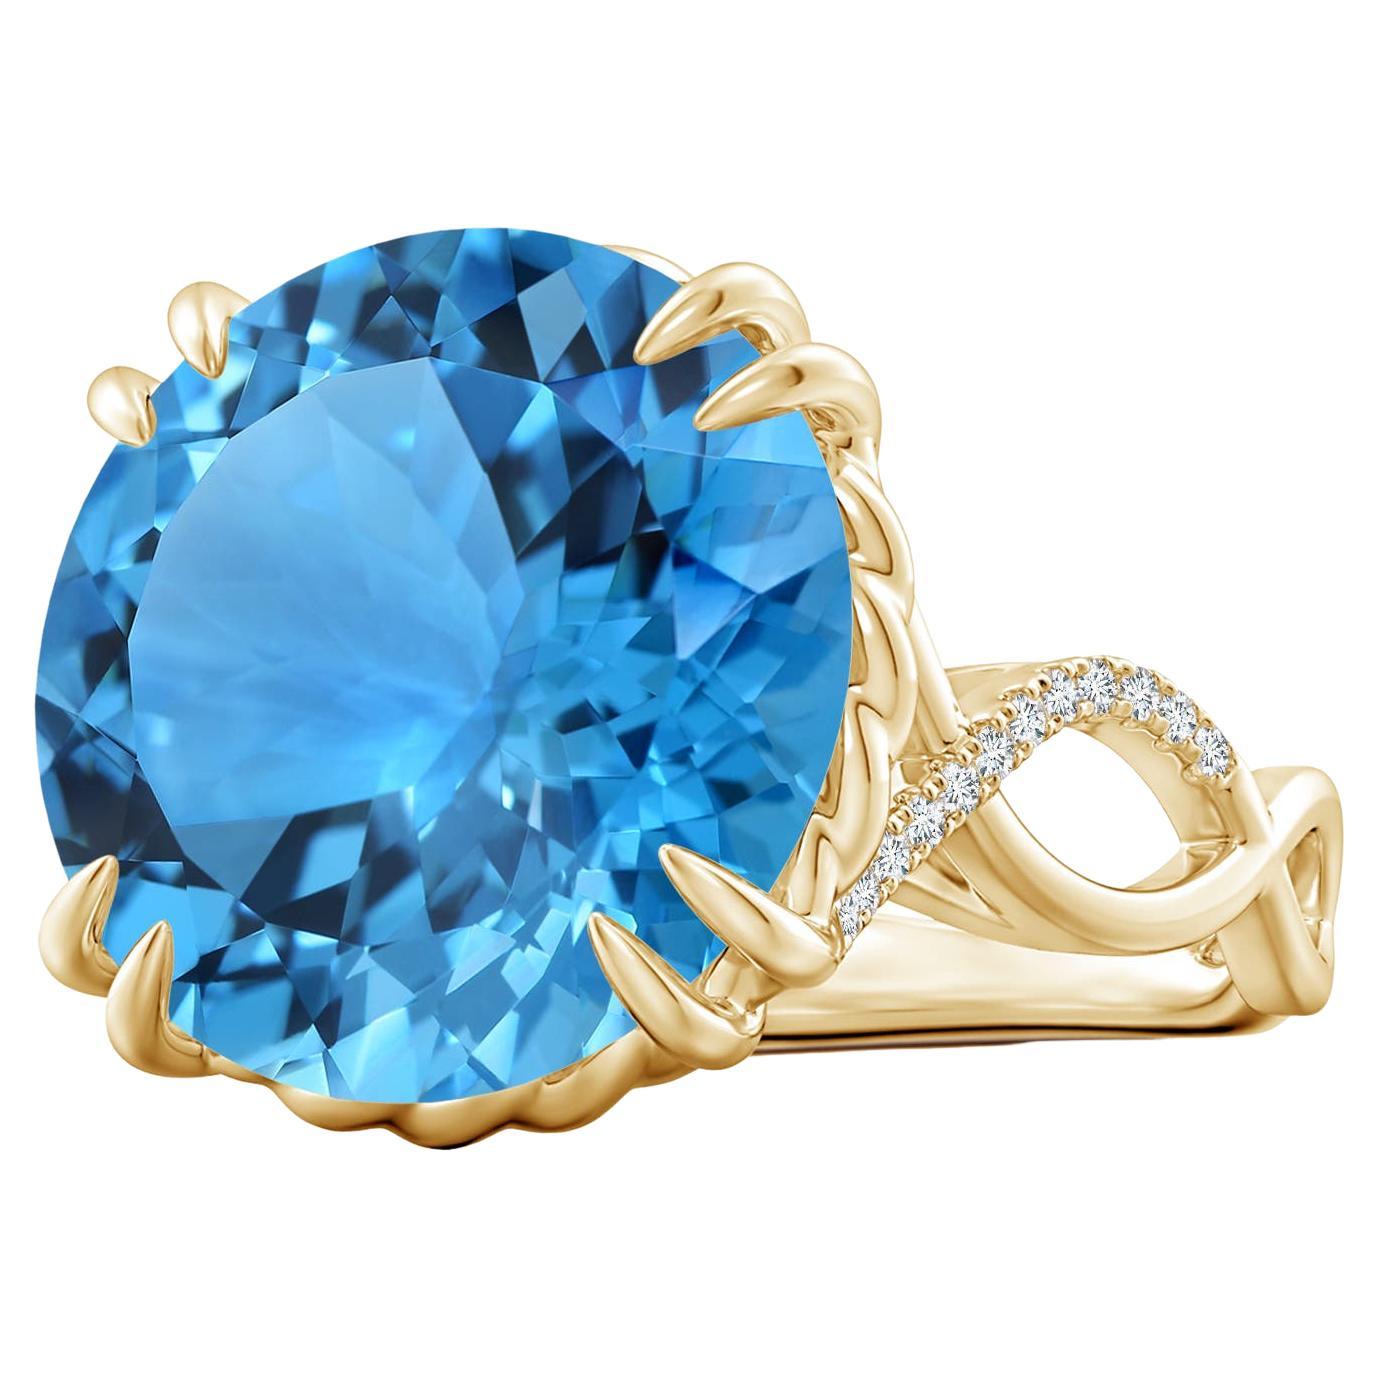 GIA Certified Swiss Blue Topaz Cocktail Ring in Yellow Gold